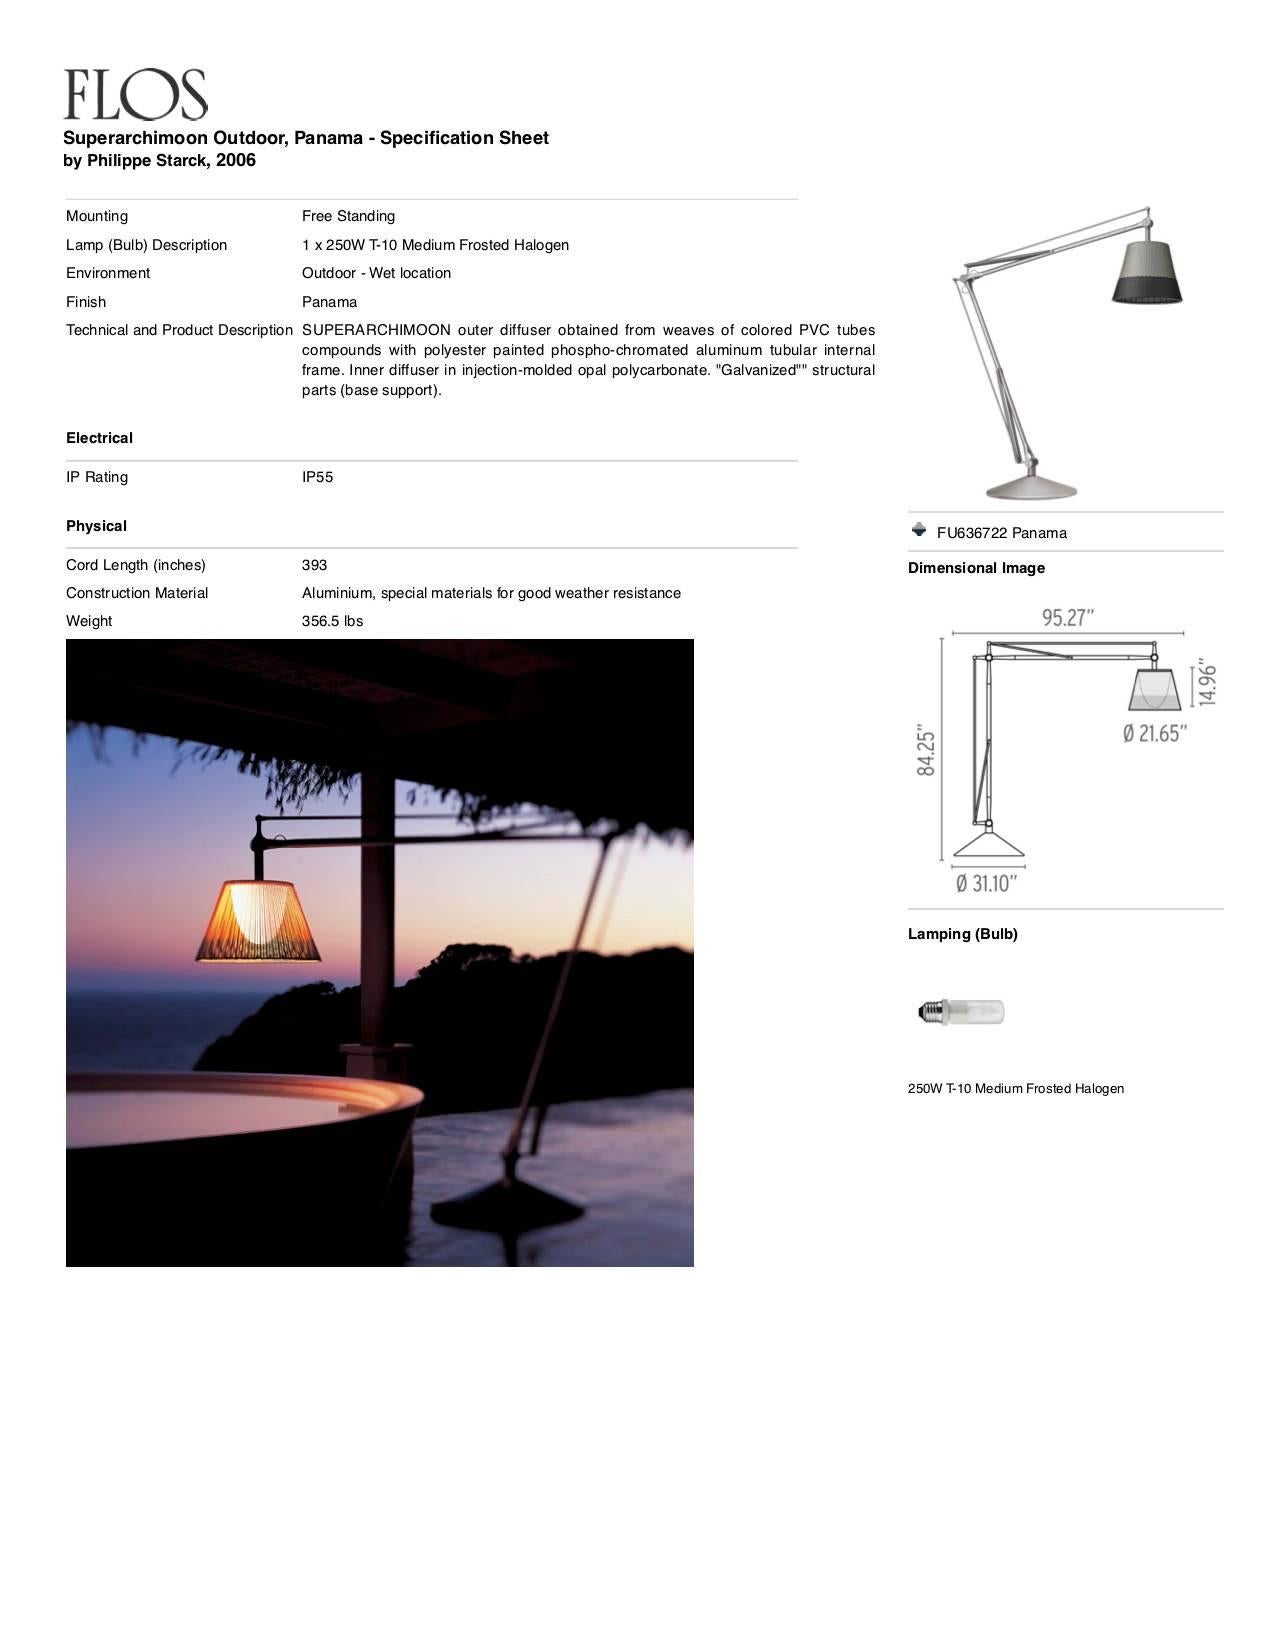 Italian FLOS Superarchimoon Outdoor Floor Lamp in Panama by Philippe Starck For Sale